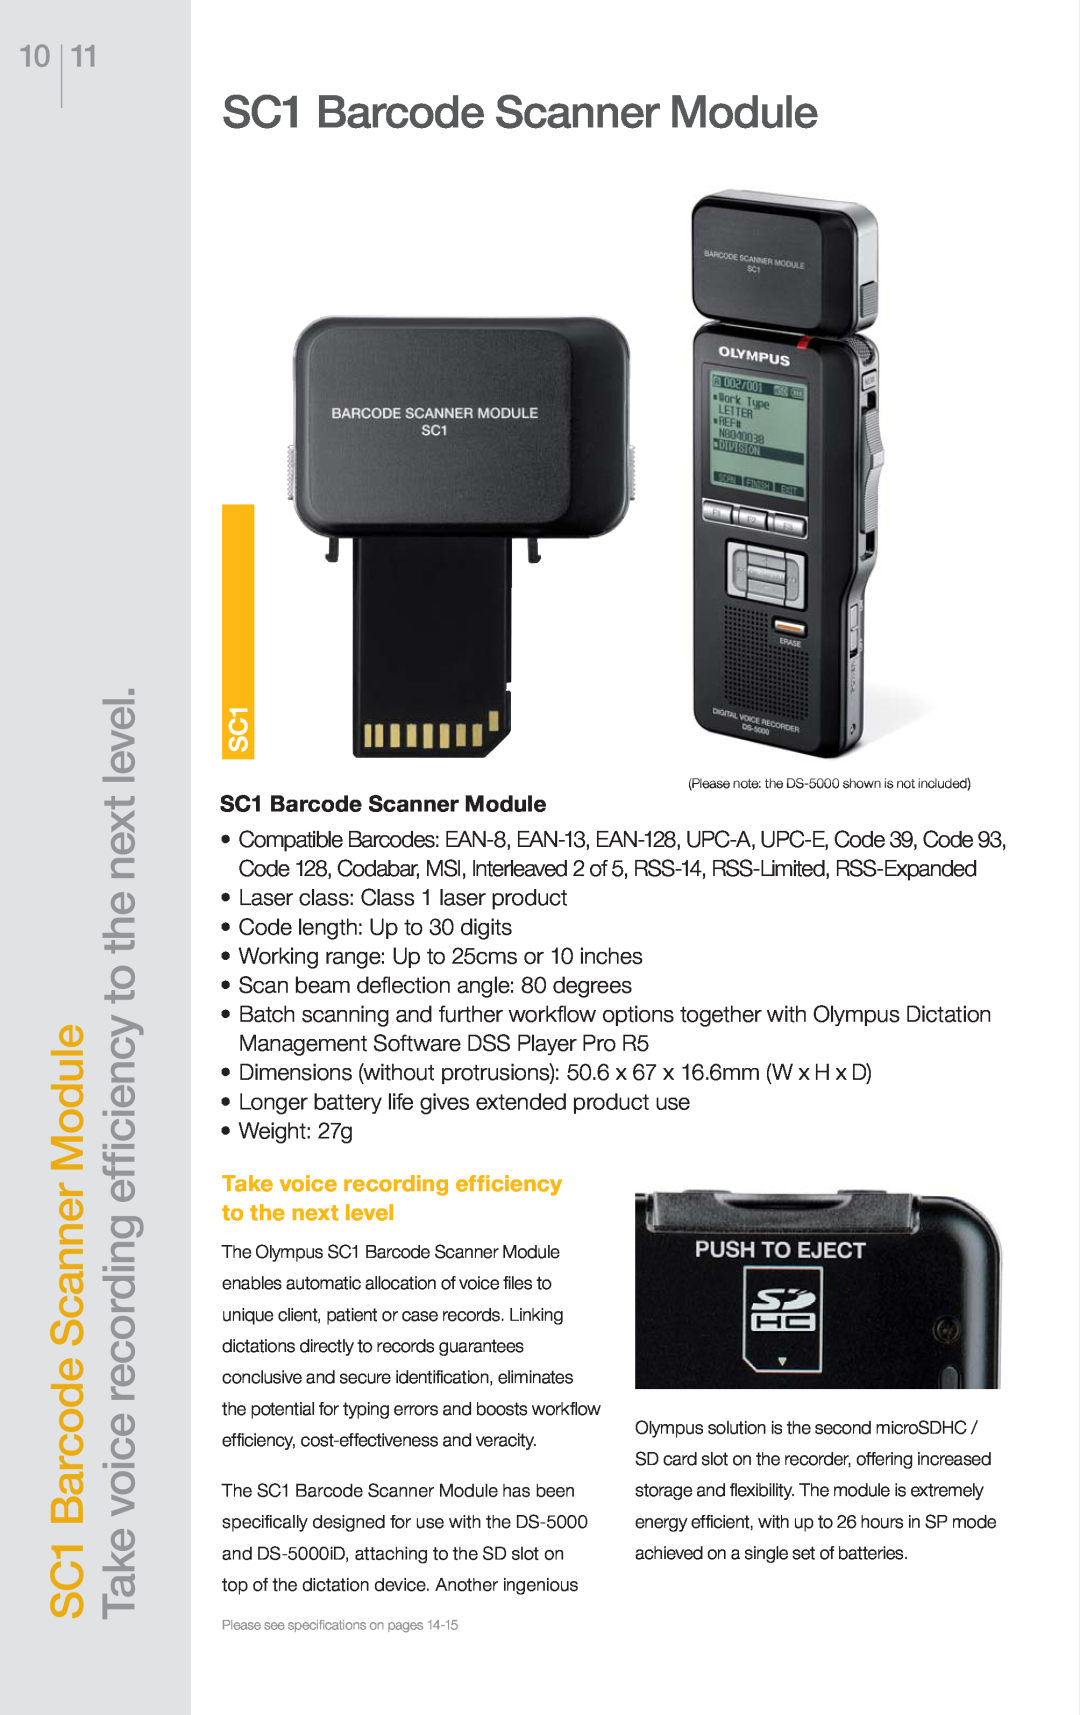 Olympus DS-5000 / DS-5000iD / DS-3400 Module efﬁciency to the next level, SC1 Barcode Scanner Module, voice recording 